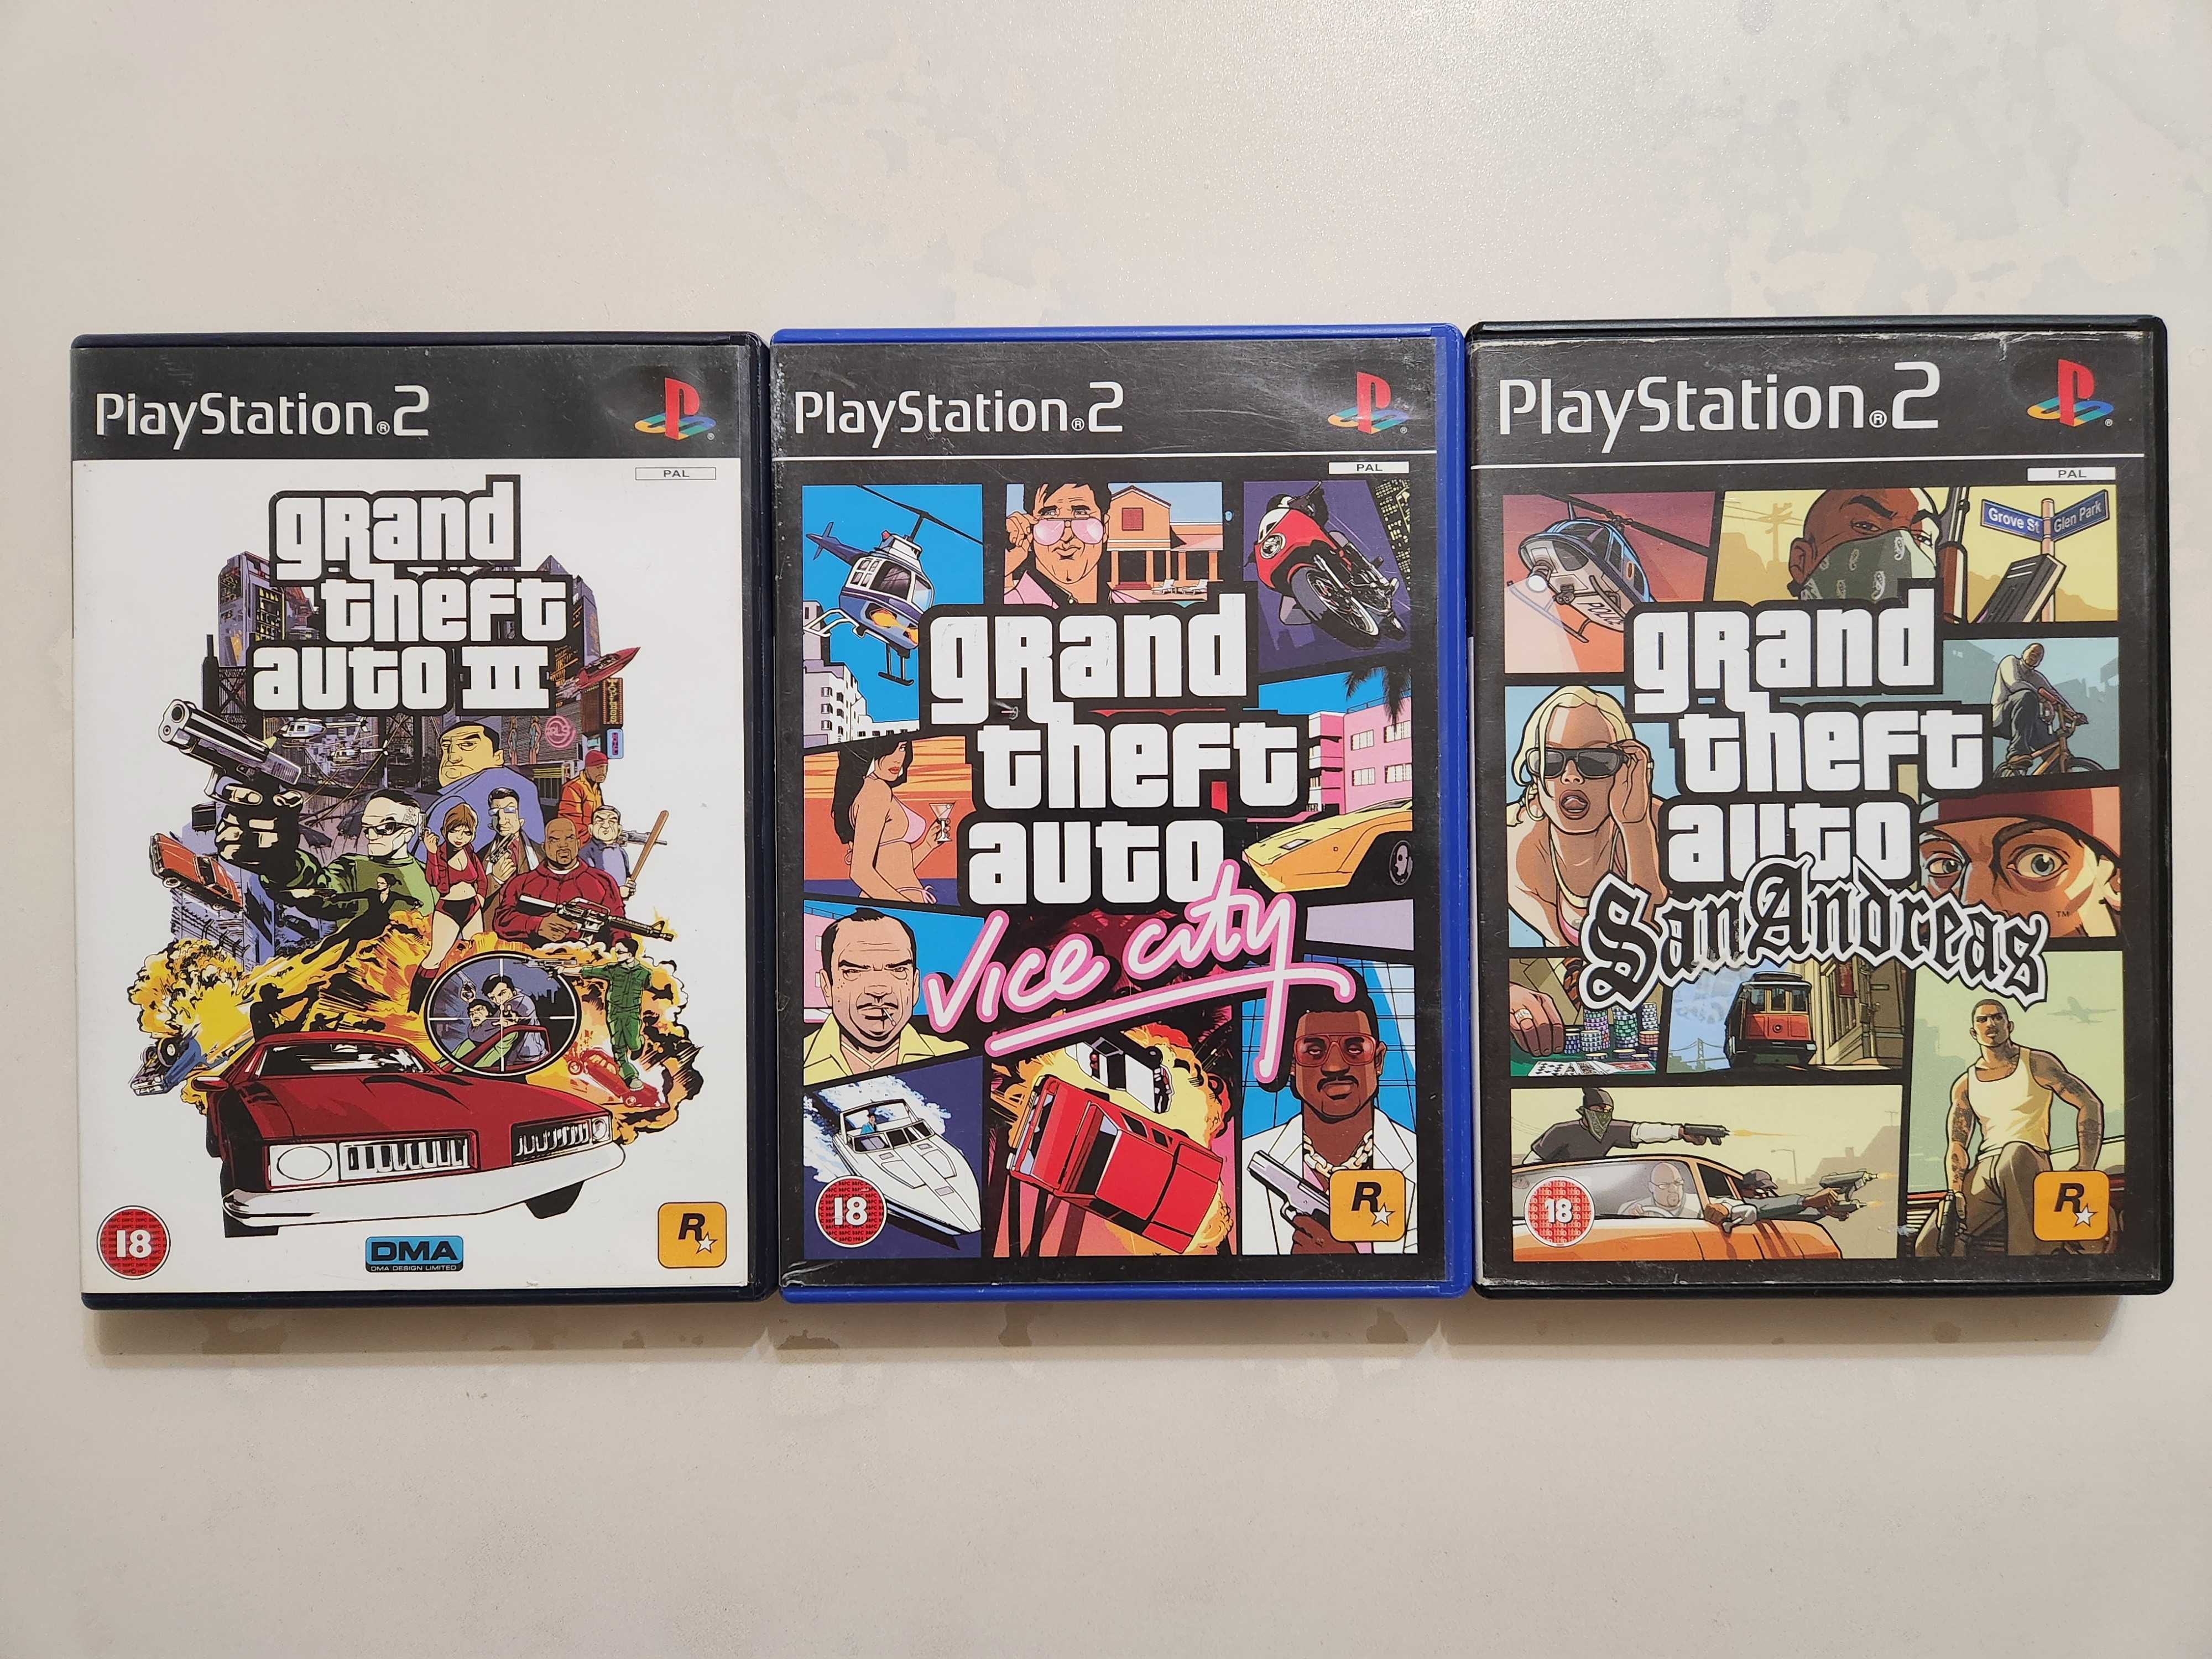 Grand Theft Auto III, Vice City si San Andreas pt. PlayStation 2 (PS2)